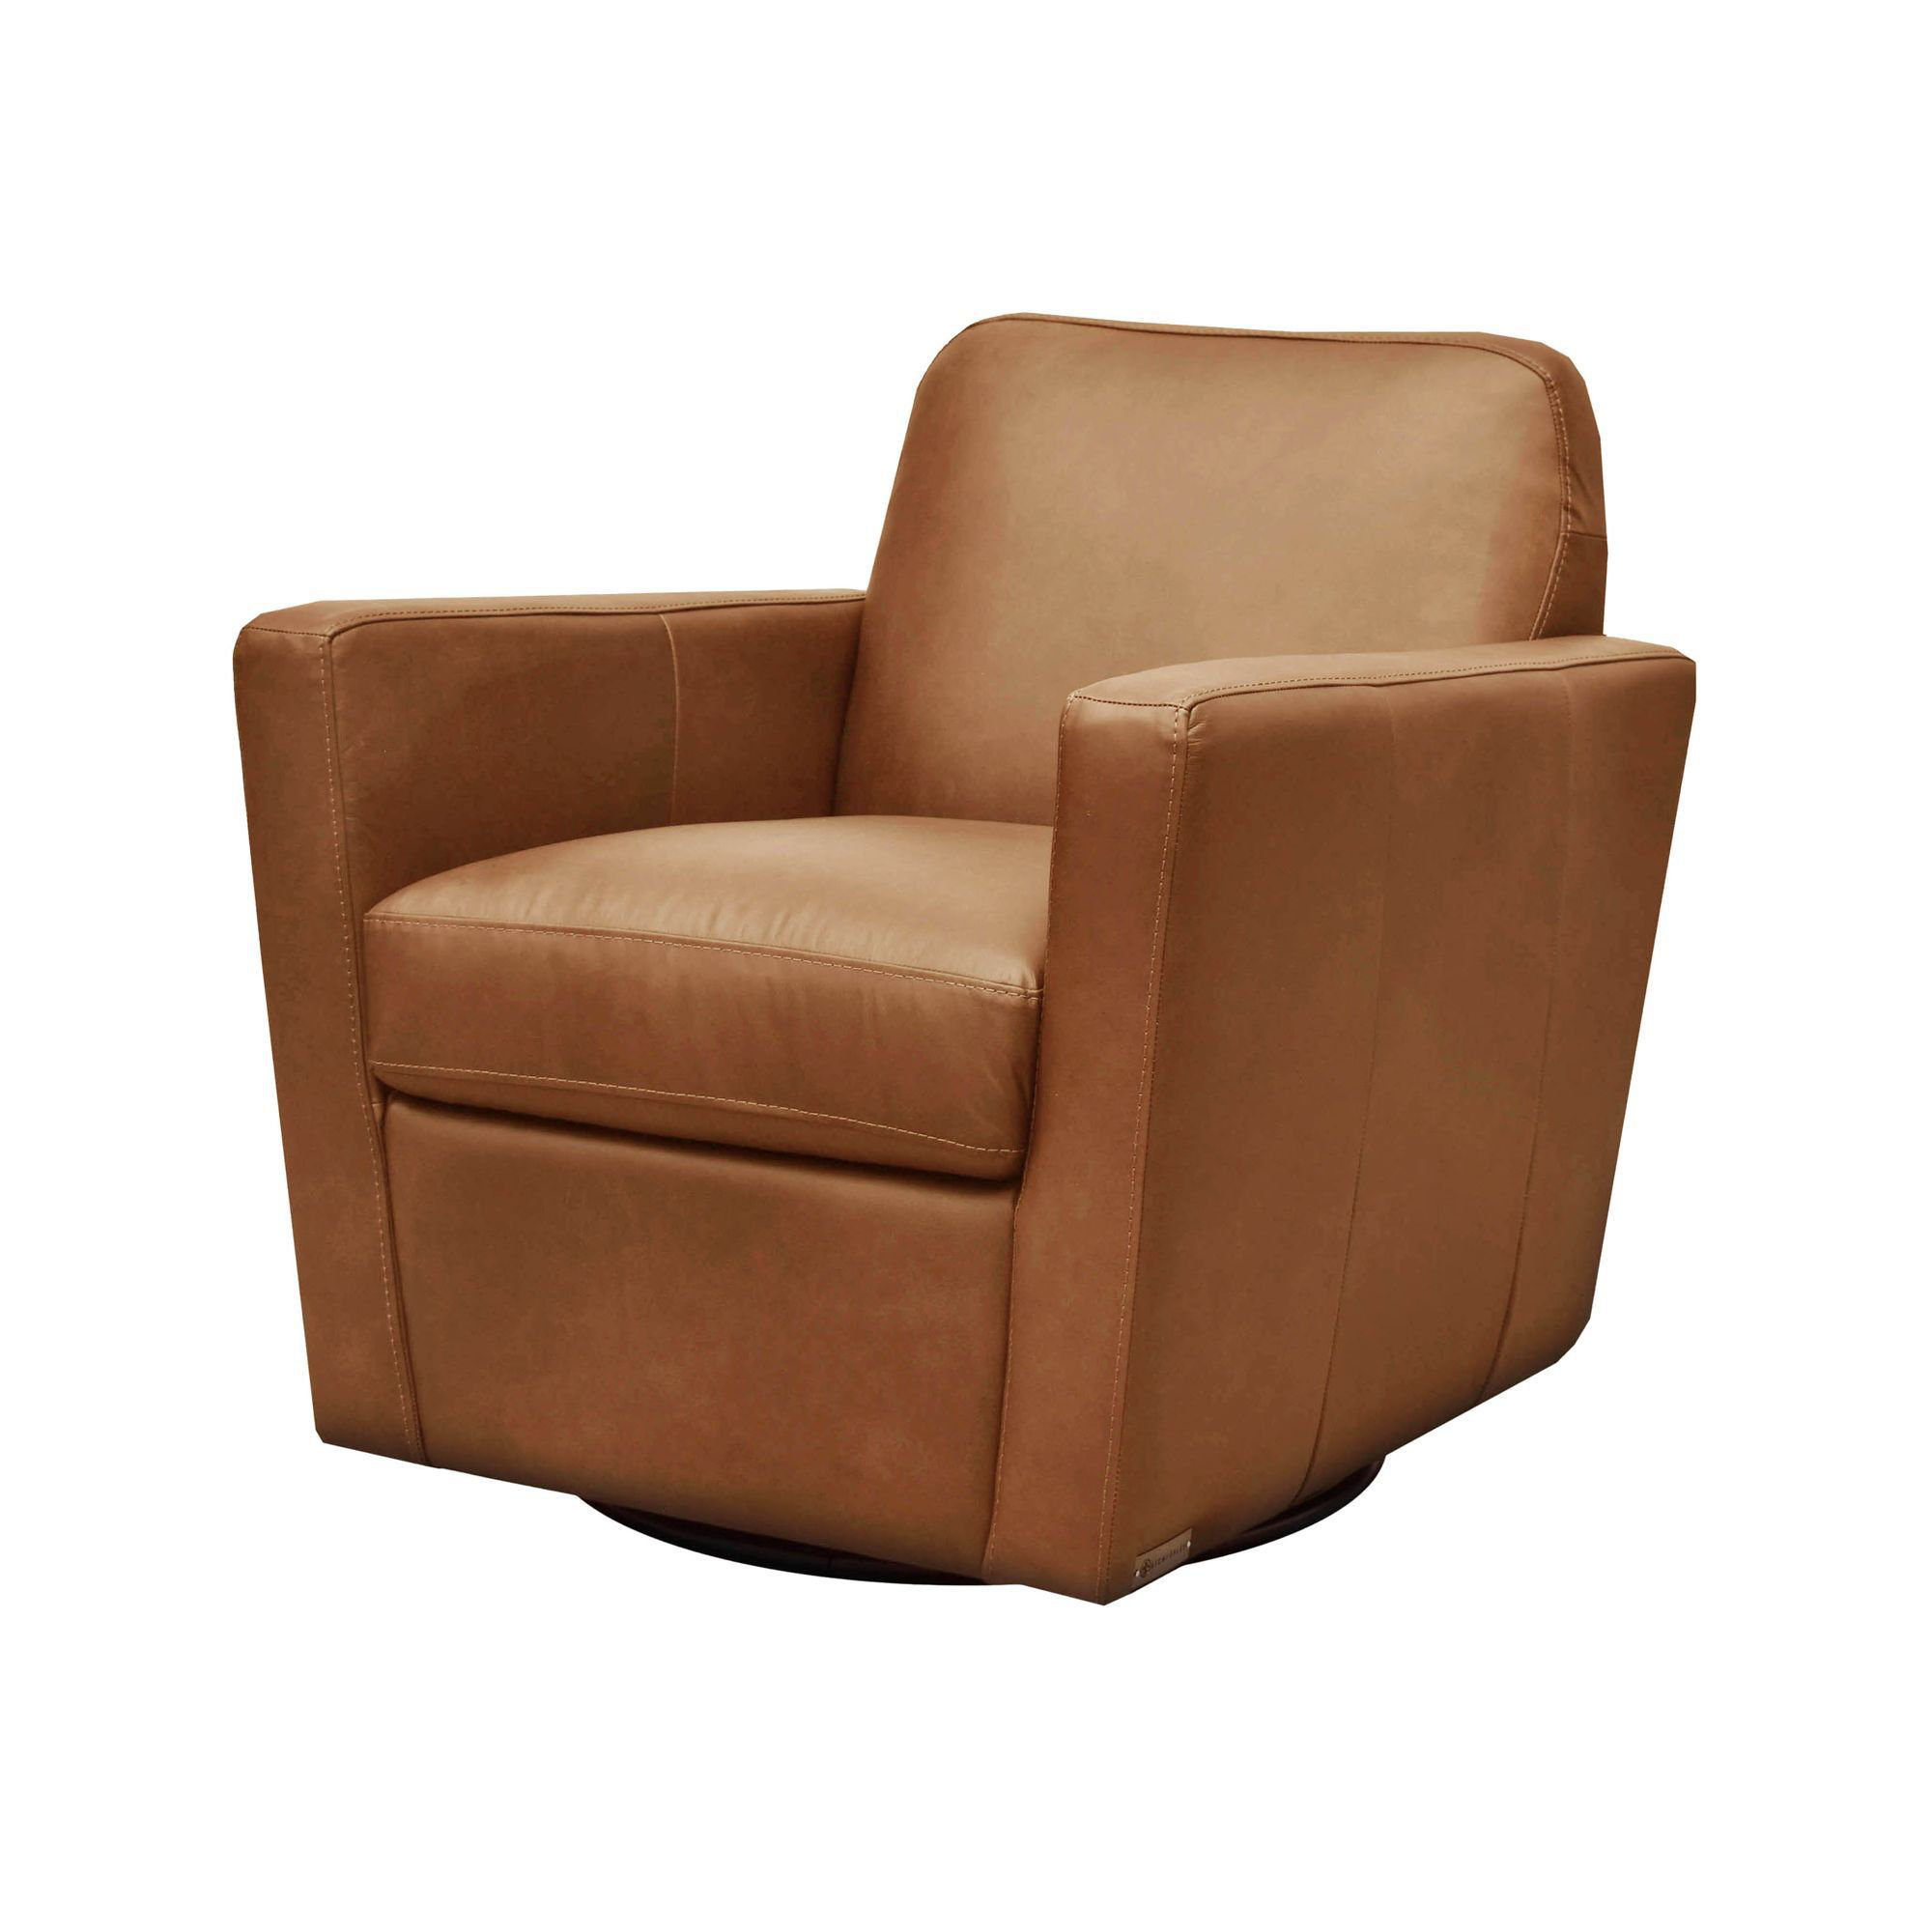 Chair Monty Wayfair Club Leather Swivel Eclectic Home |